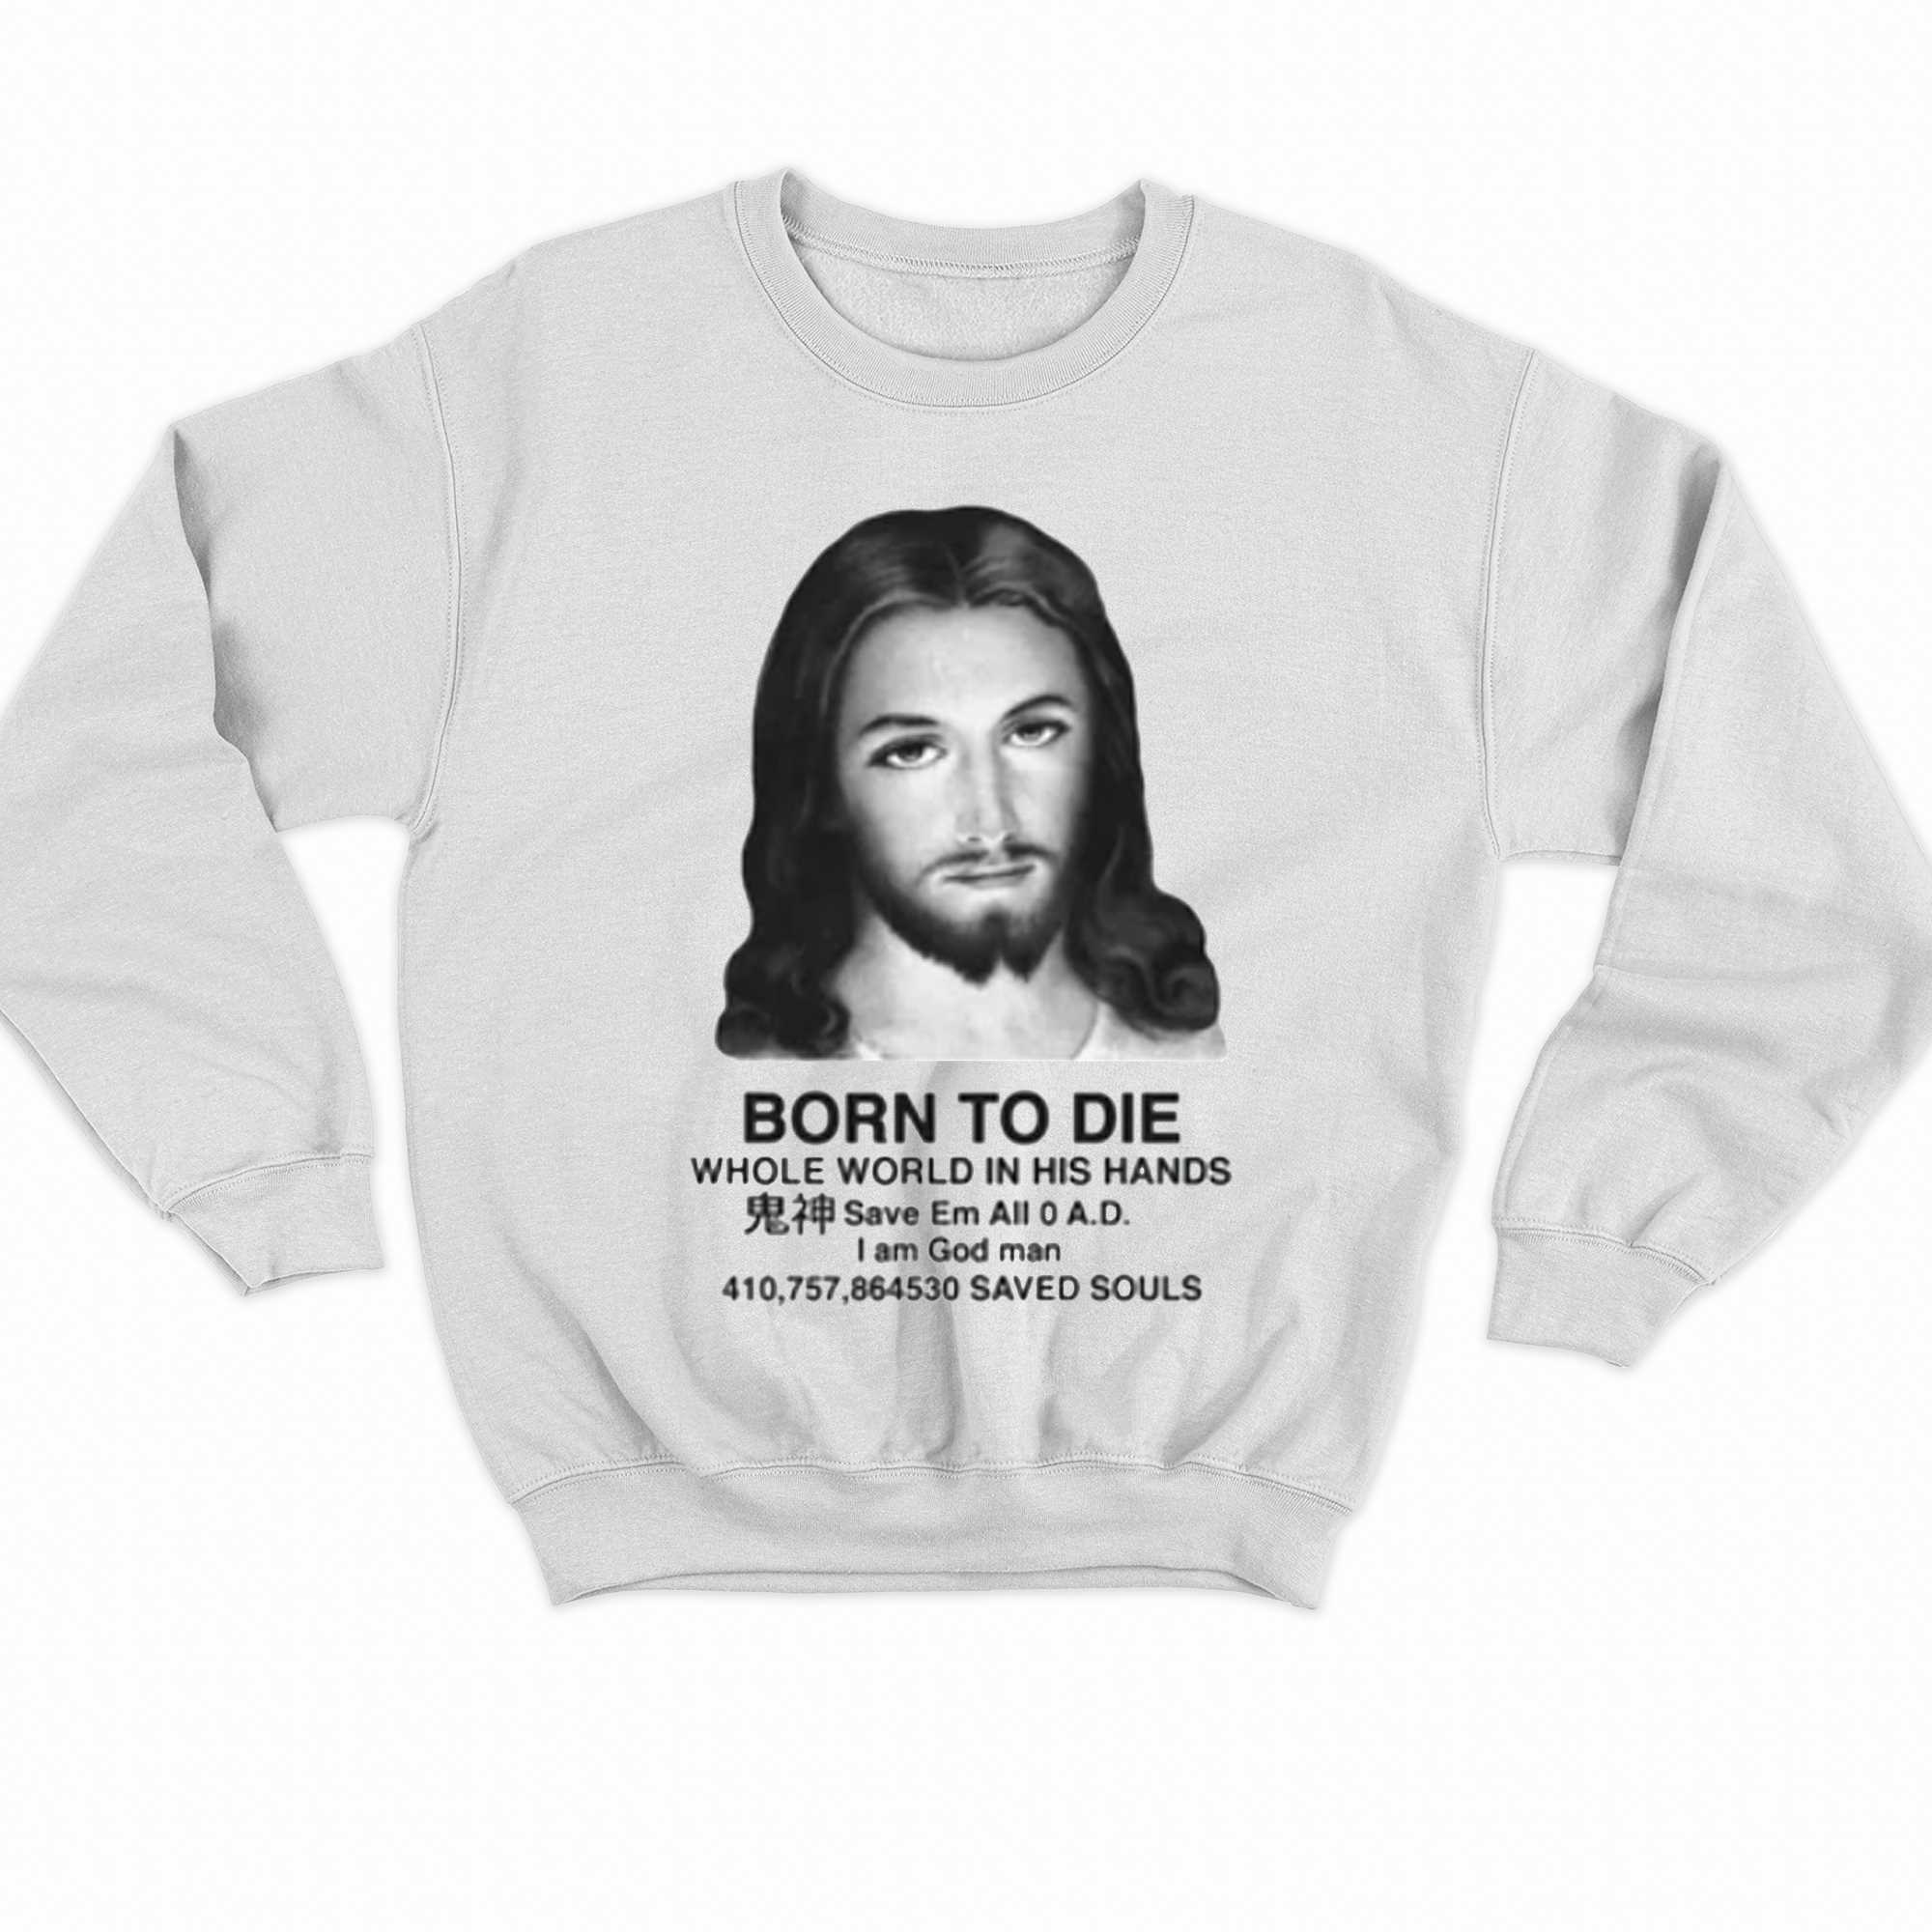 Born To Die For Your Sins T-shirt 